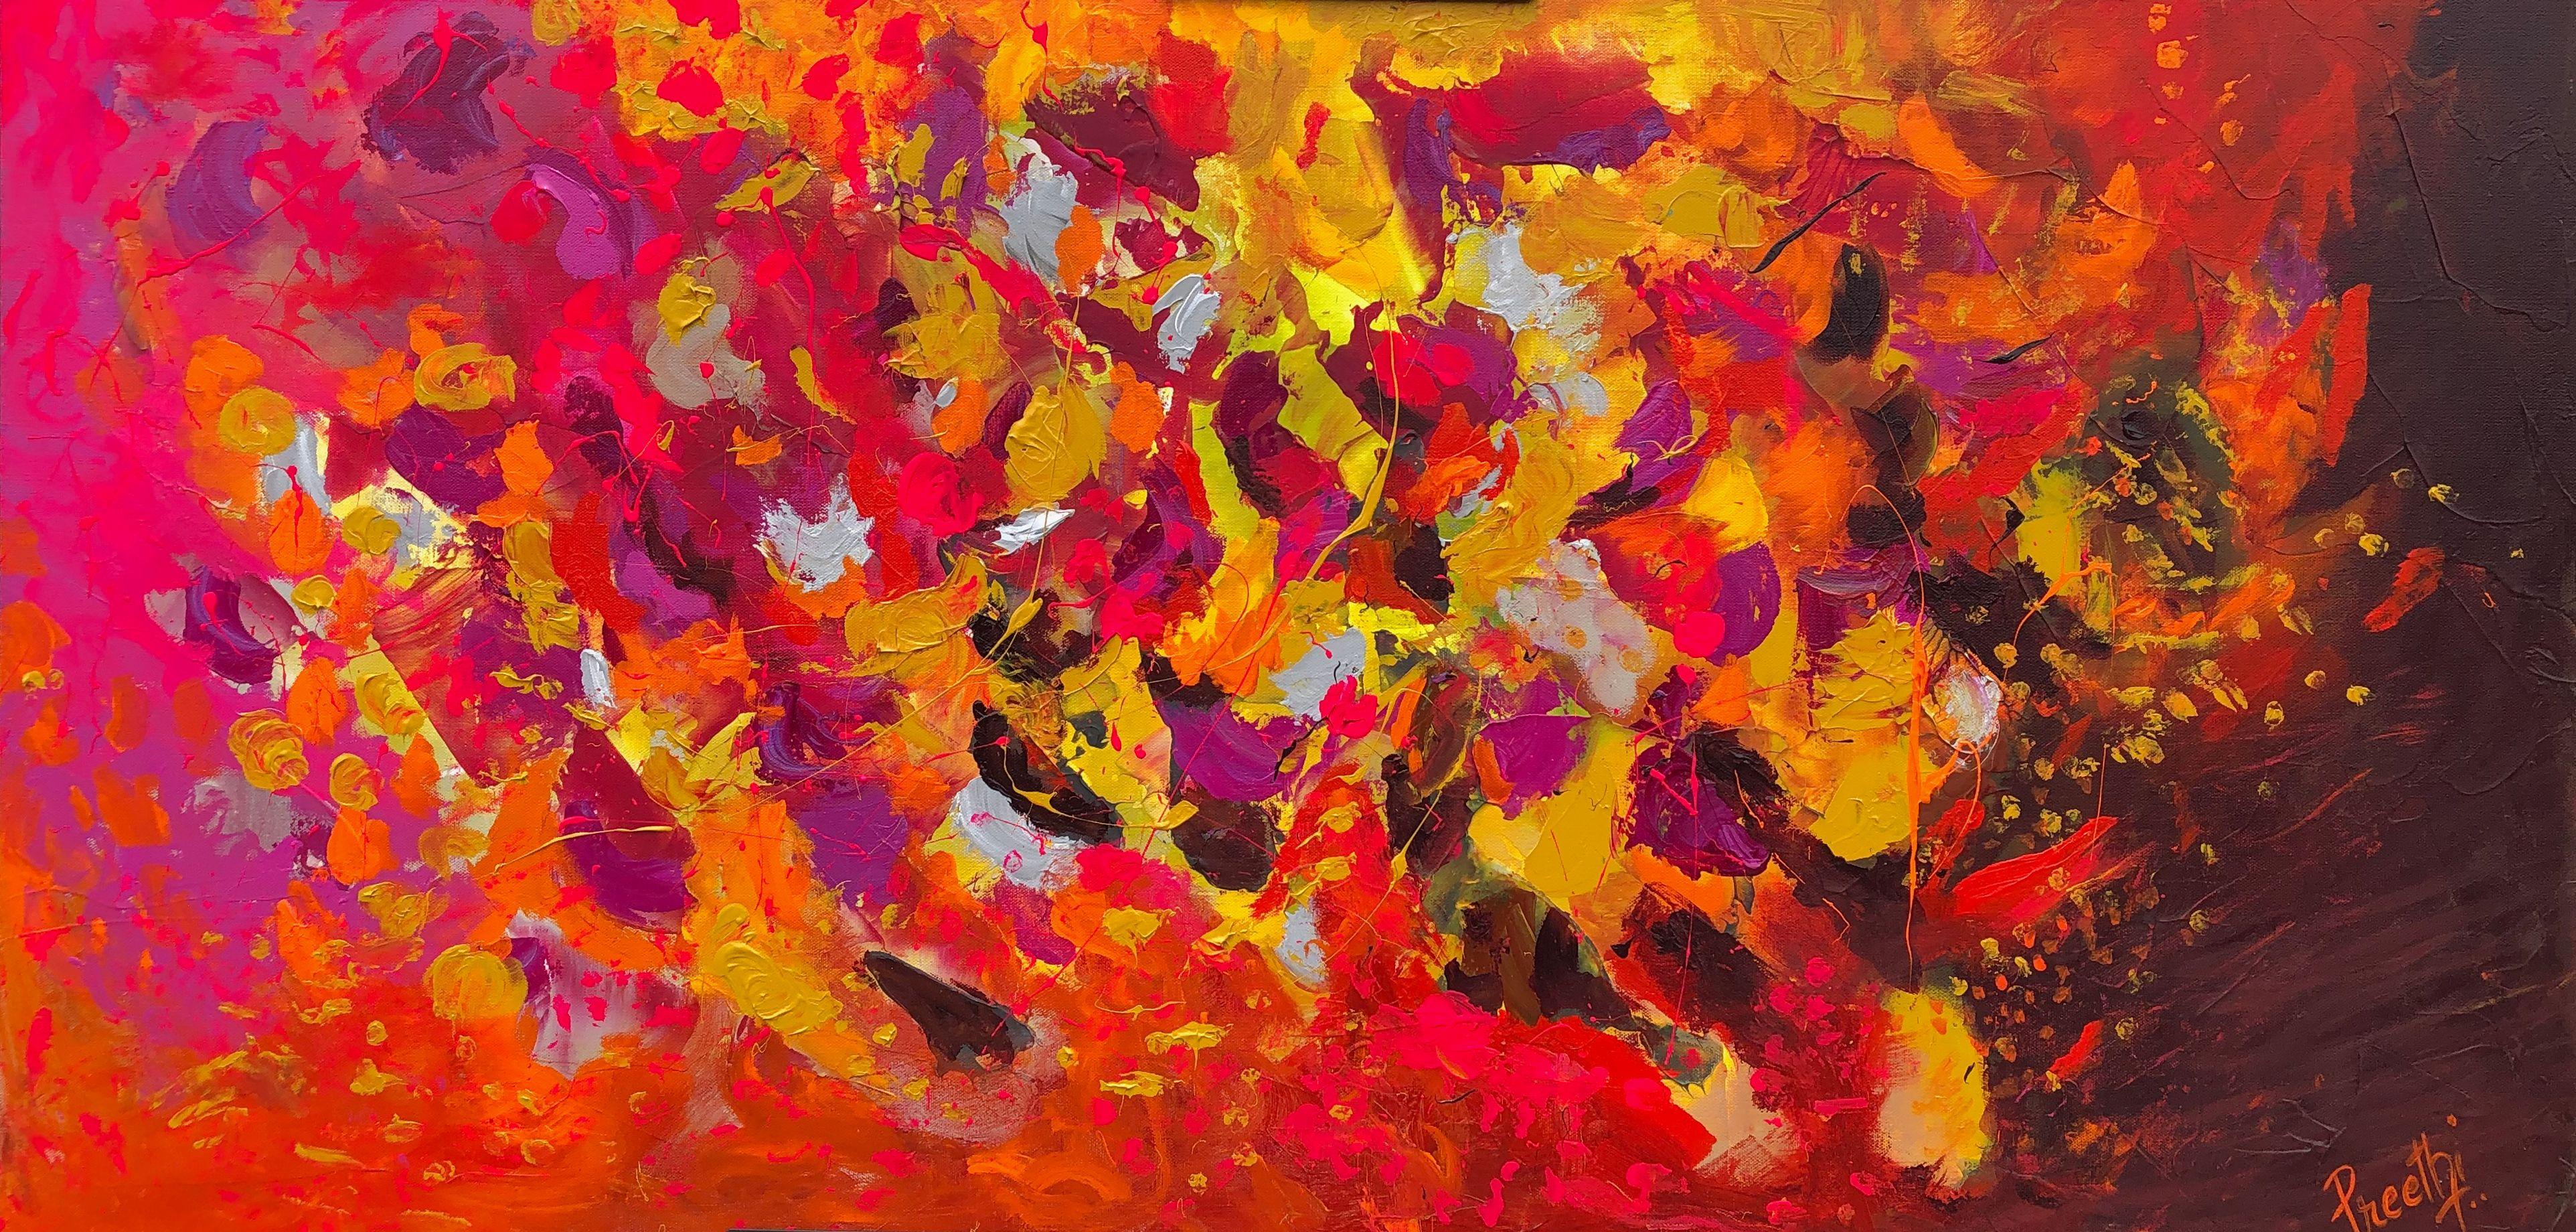 Preethi Mathialagan Abstract Painting - Scattered, Painting, Acrylic on Canvas